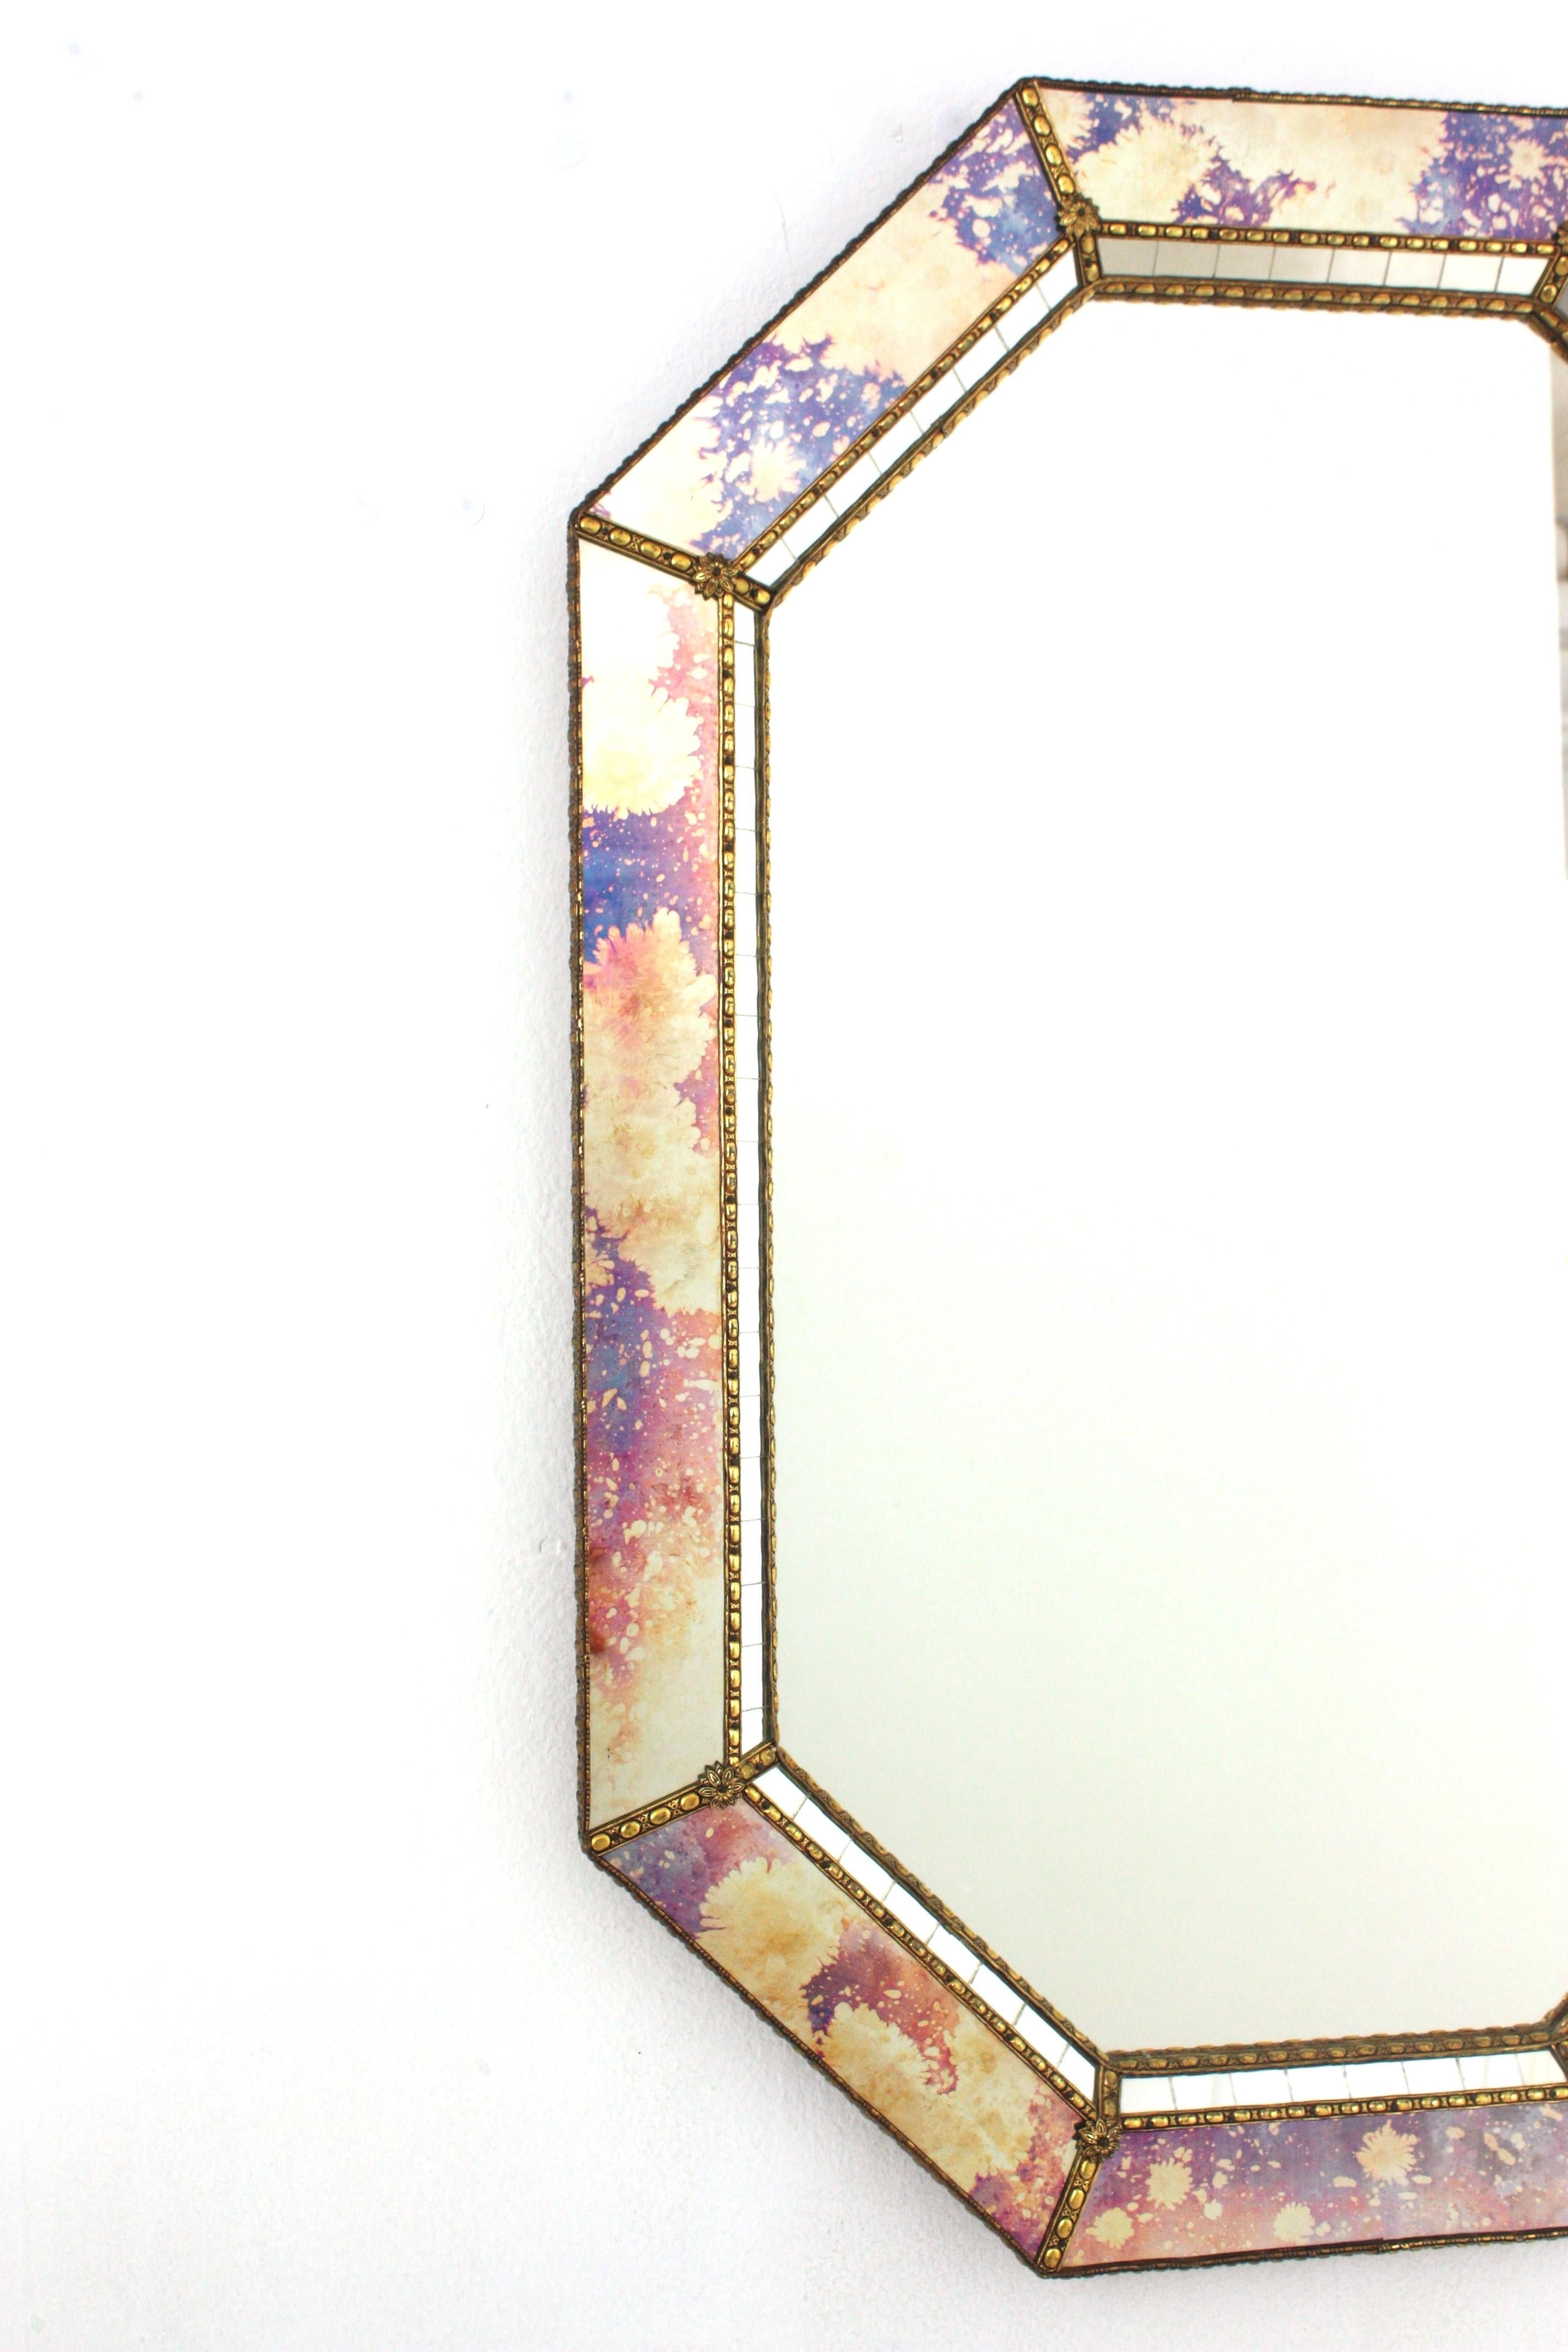 20th Century Octagonal Venetian Style Mirrors with Pink Purple Glass & Brass Details, Pair For Sale